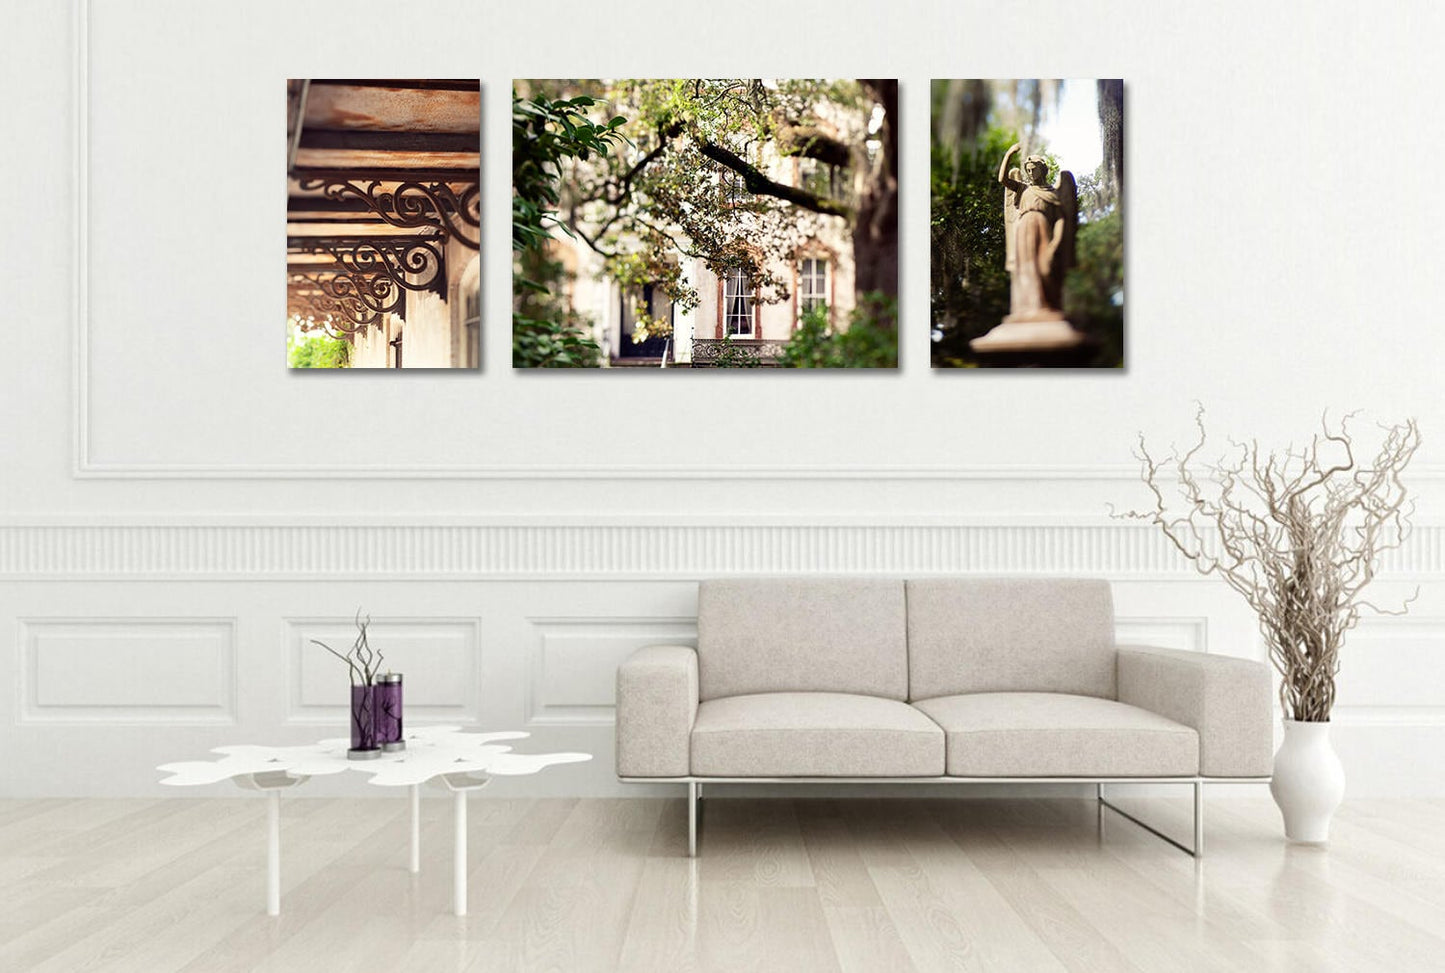 Venice Italy Photography Print, Travel Photography, Canal Architecture, Unframed Photo or Canvas Wrap, Large Unframed Living Room Wall Art - eireanneilis